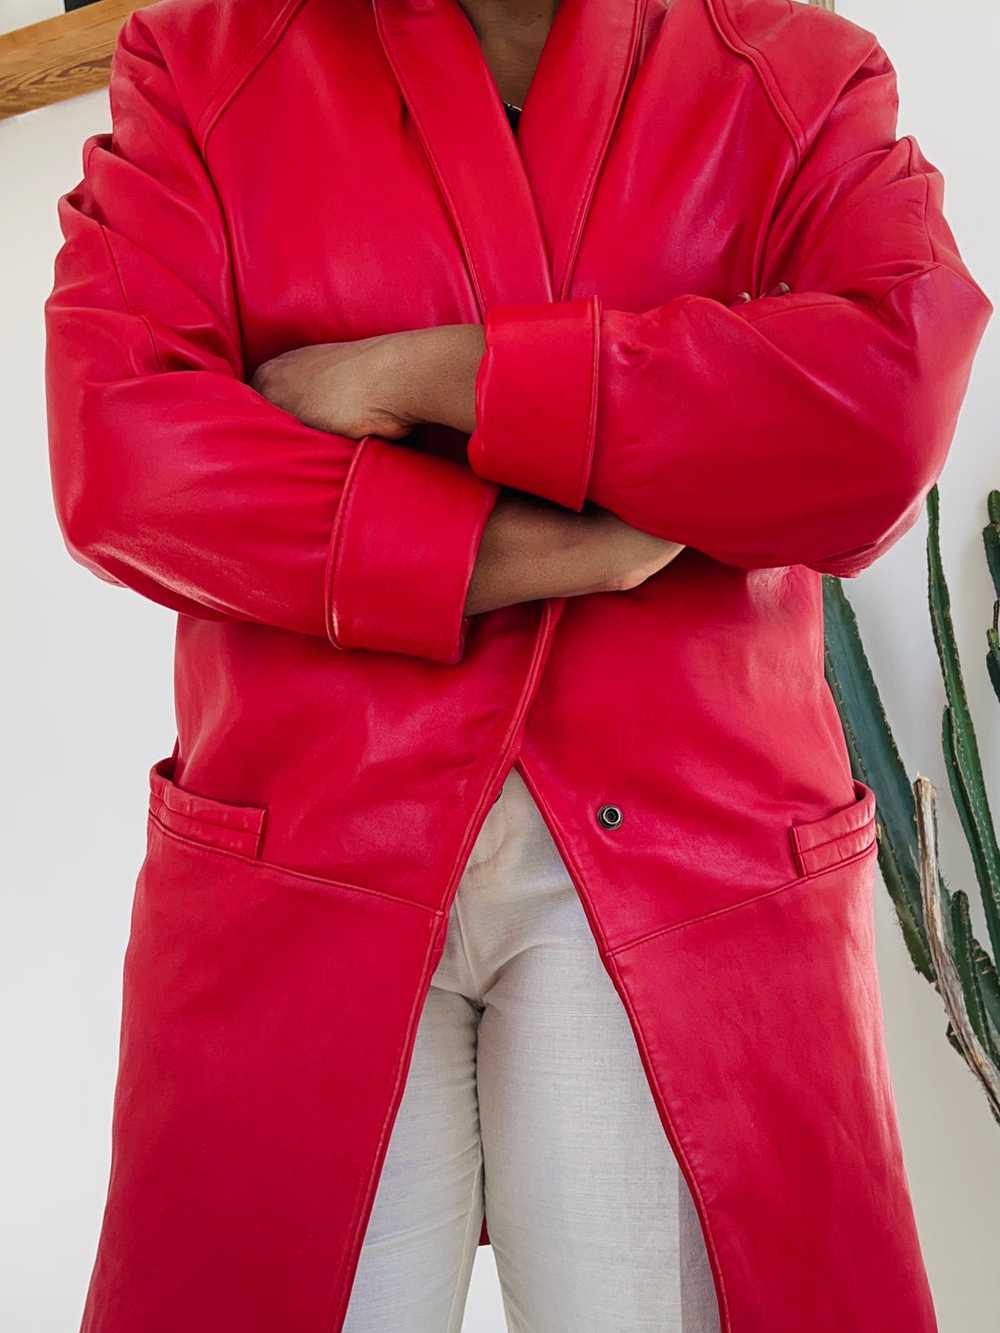 Red Leather Jacket - image 3